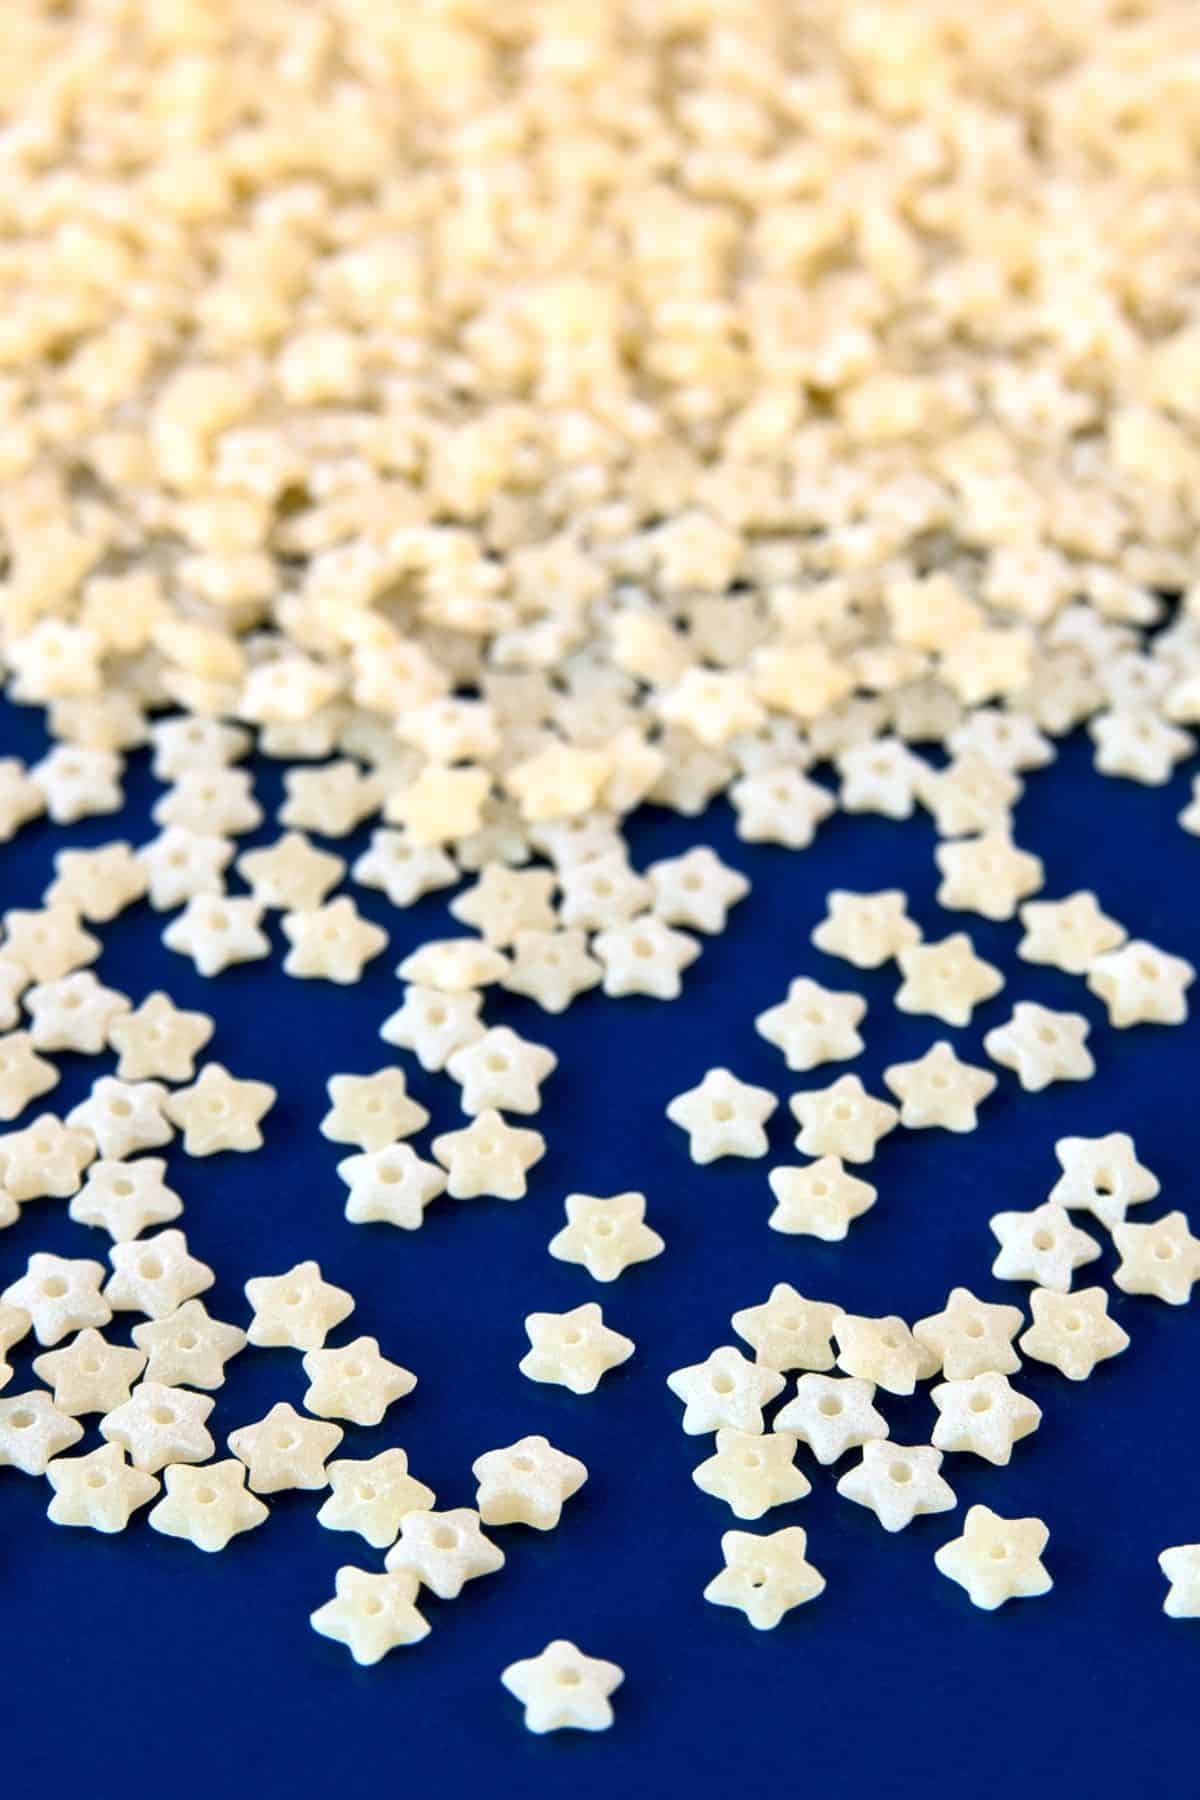 Steline pasta which is star shaped pasta on a blue background.